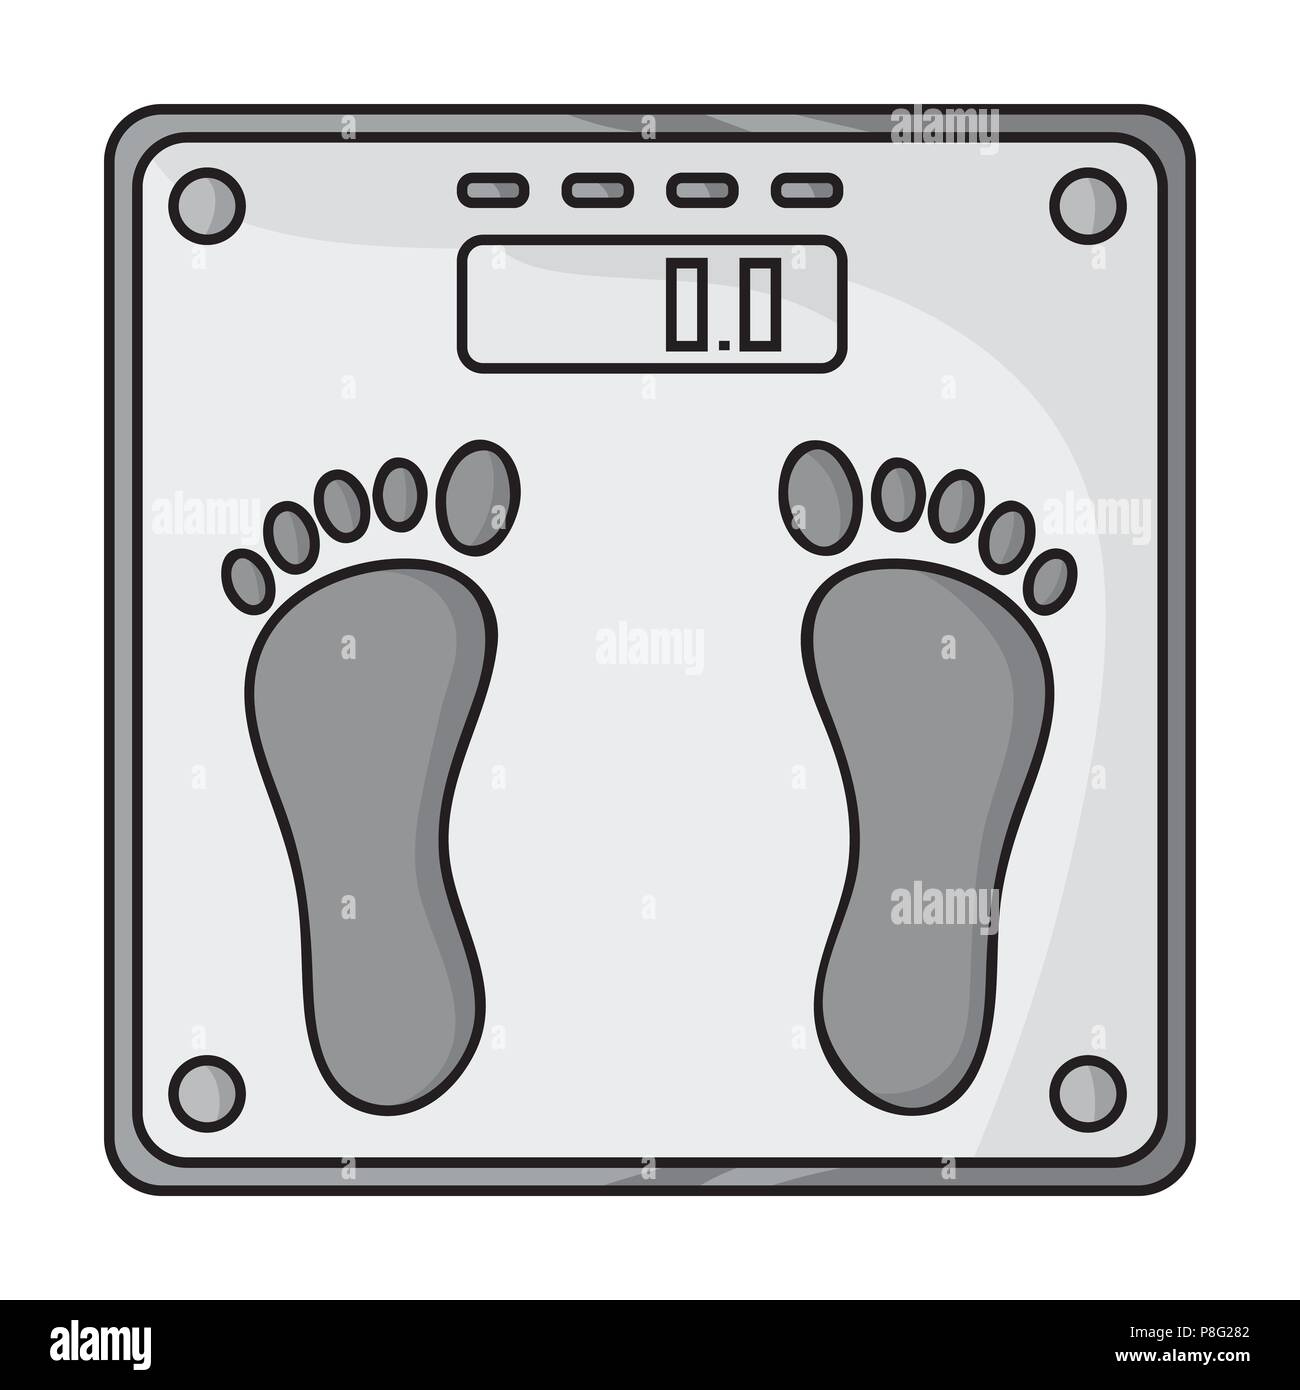 Fitness silhouette weigh scale gym graphic Vector Image